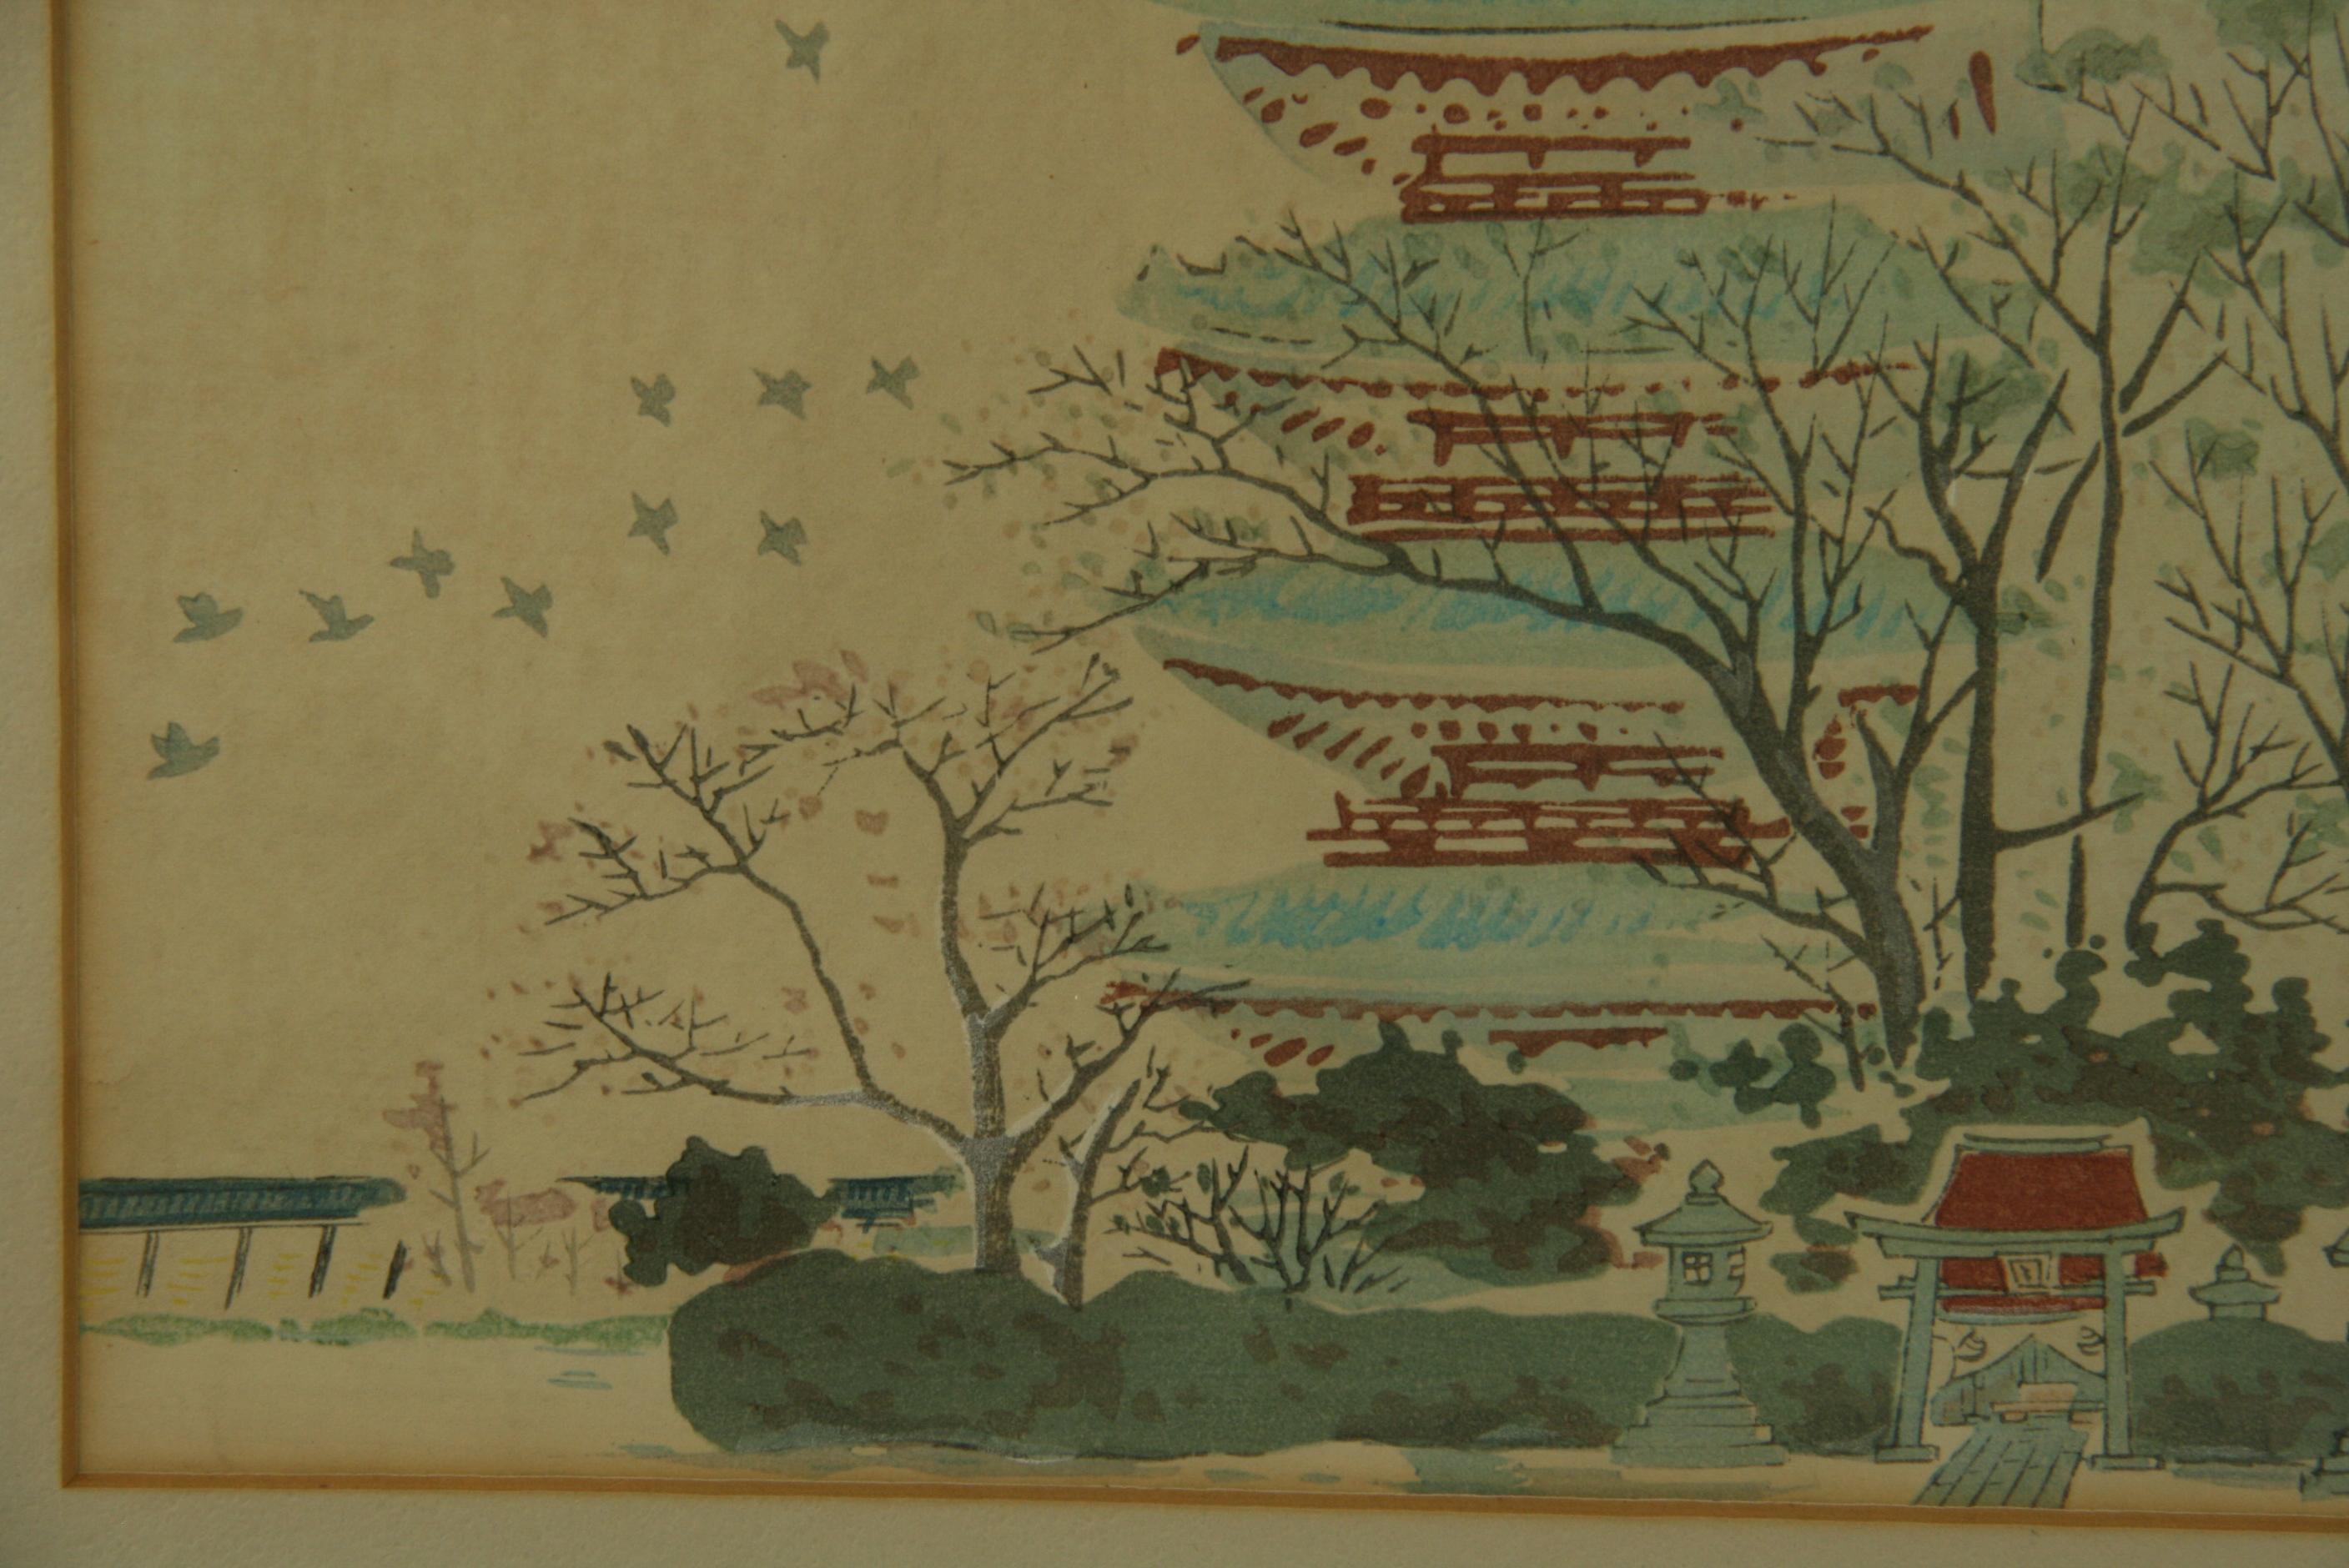 3722 Japanese Woodblock on paper set in a vintage wood frame
Image size 9x10.5